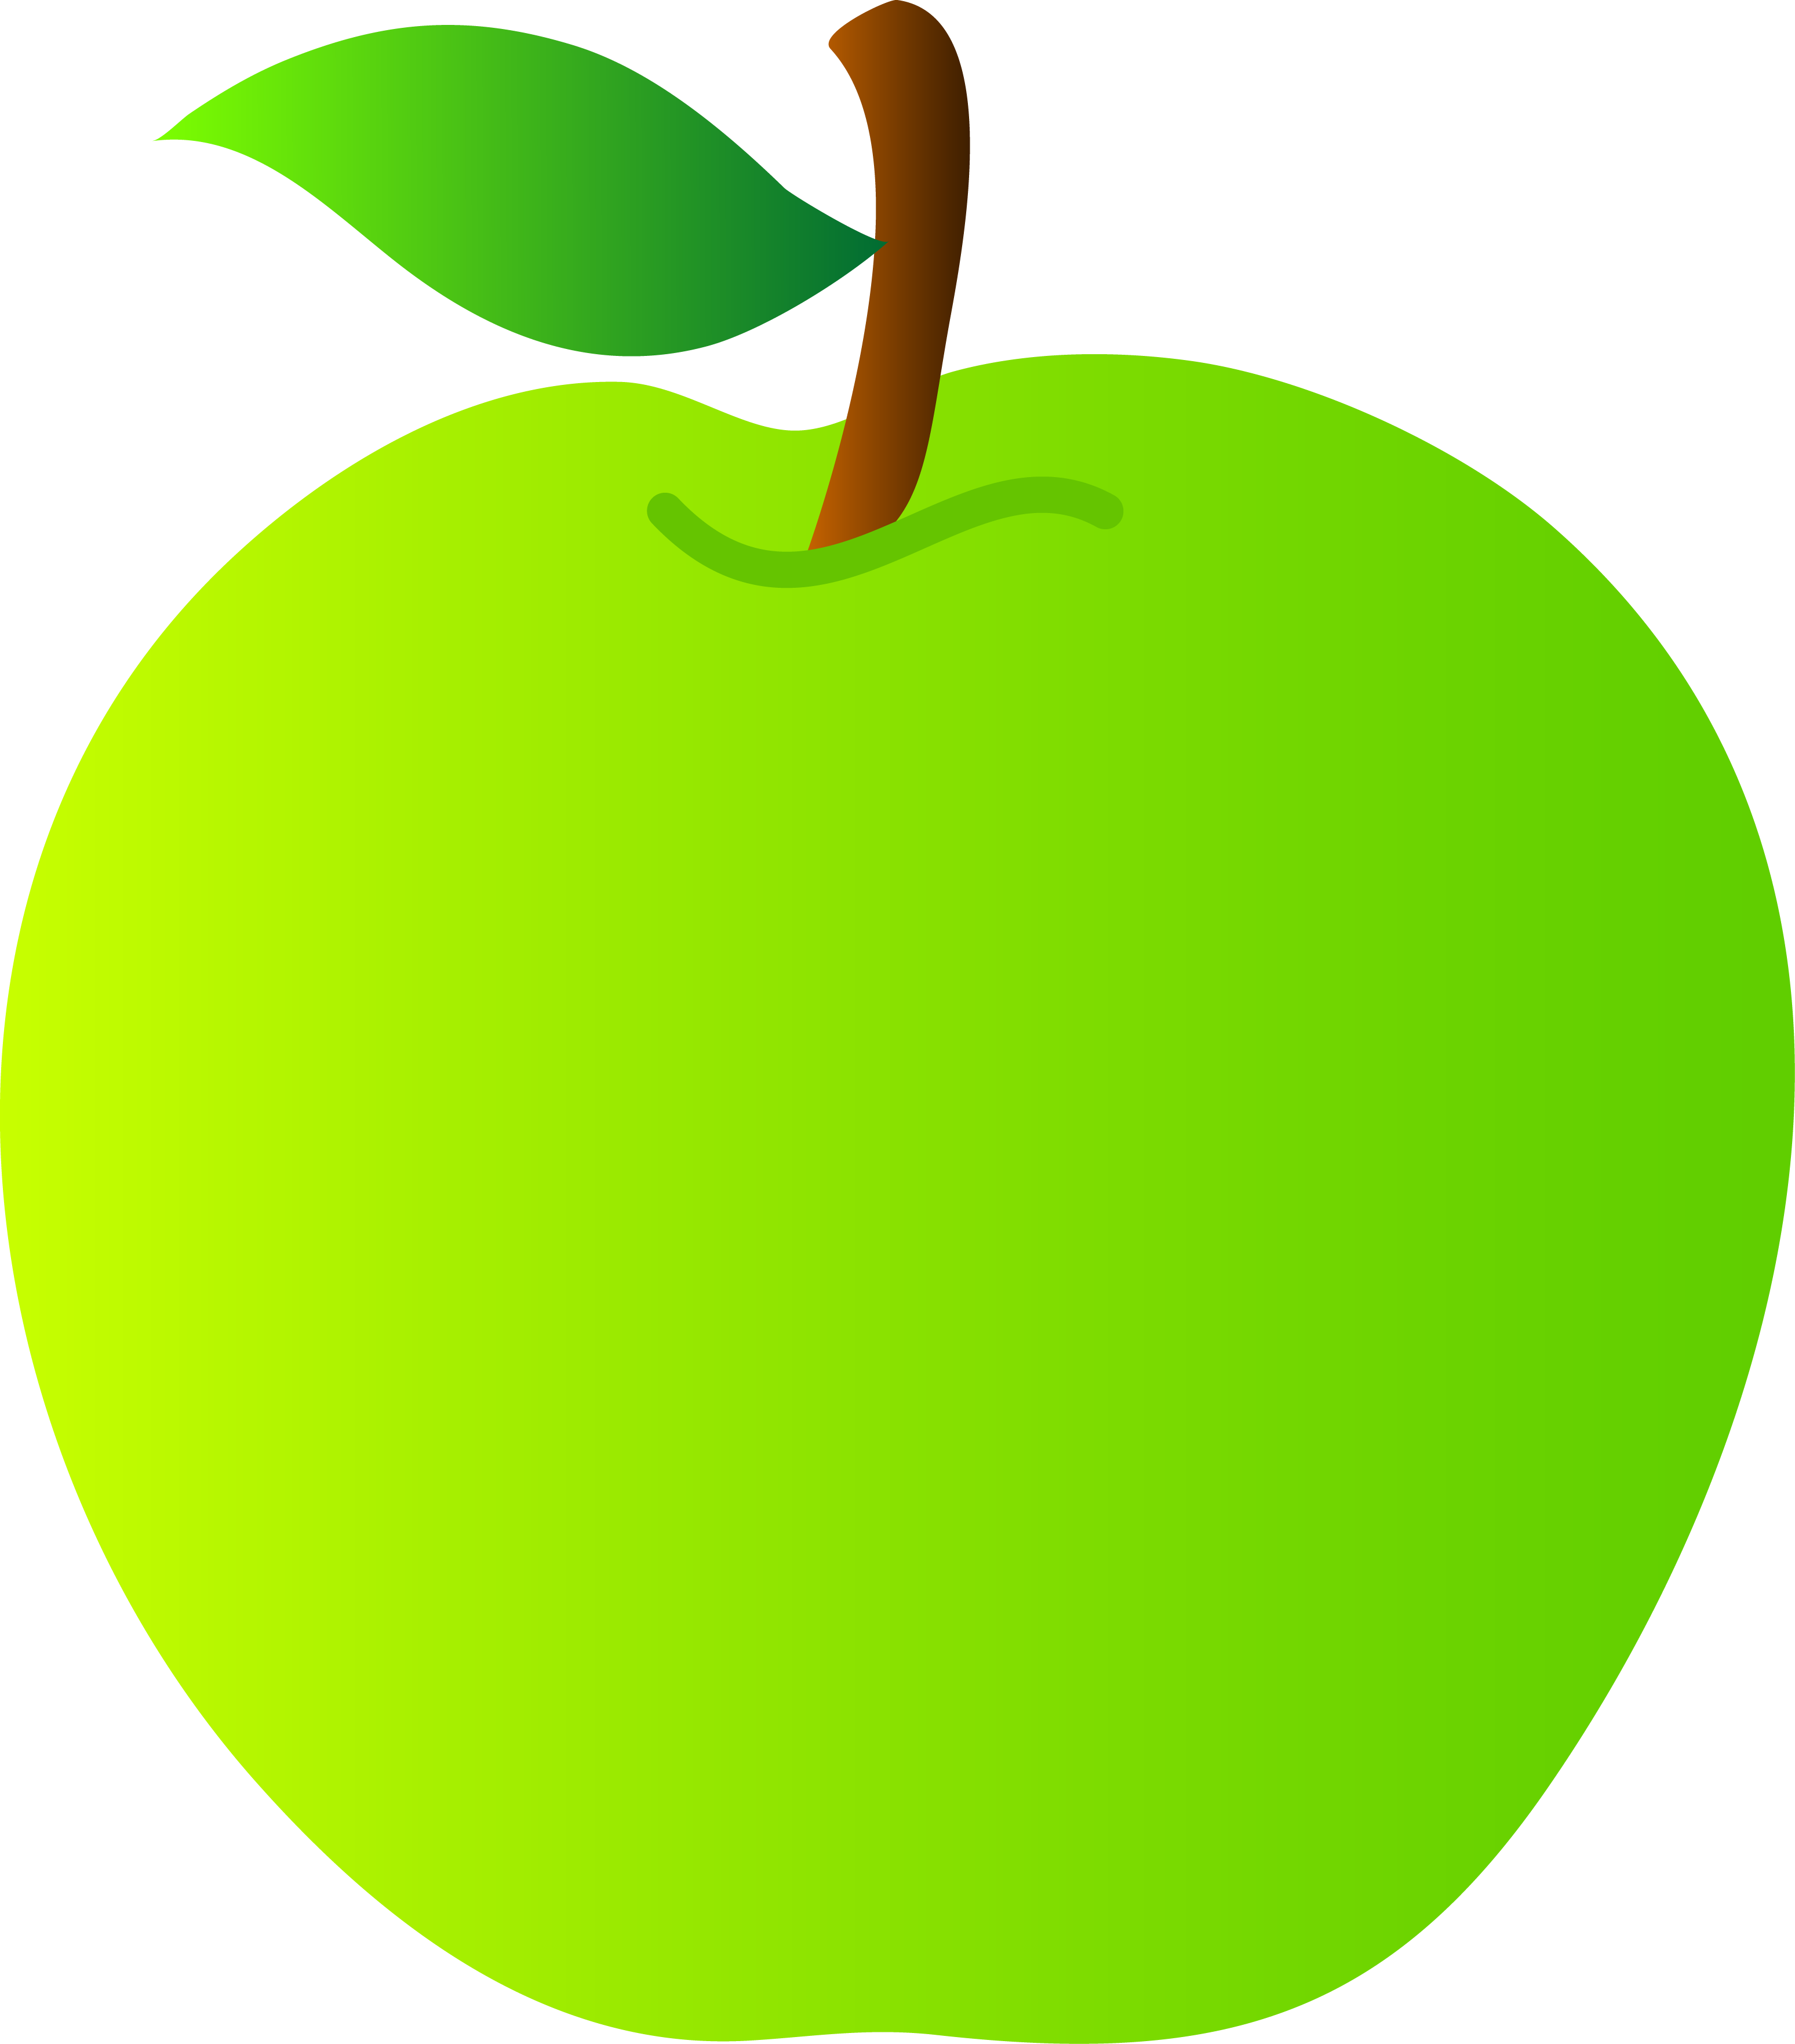 Image - Apple green clipart.png - Raptorlord Wiki